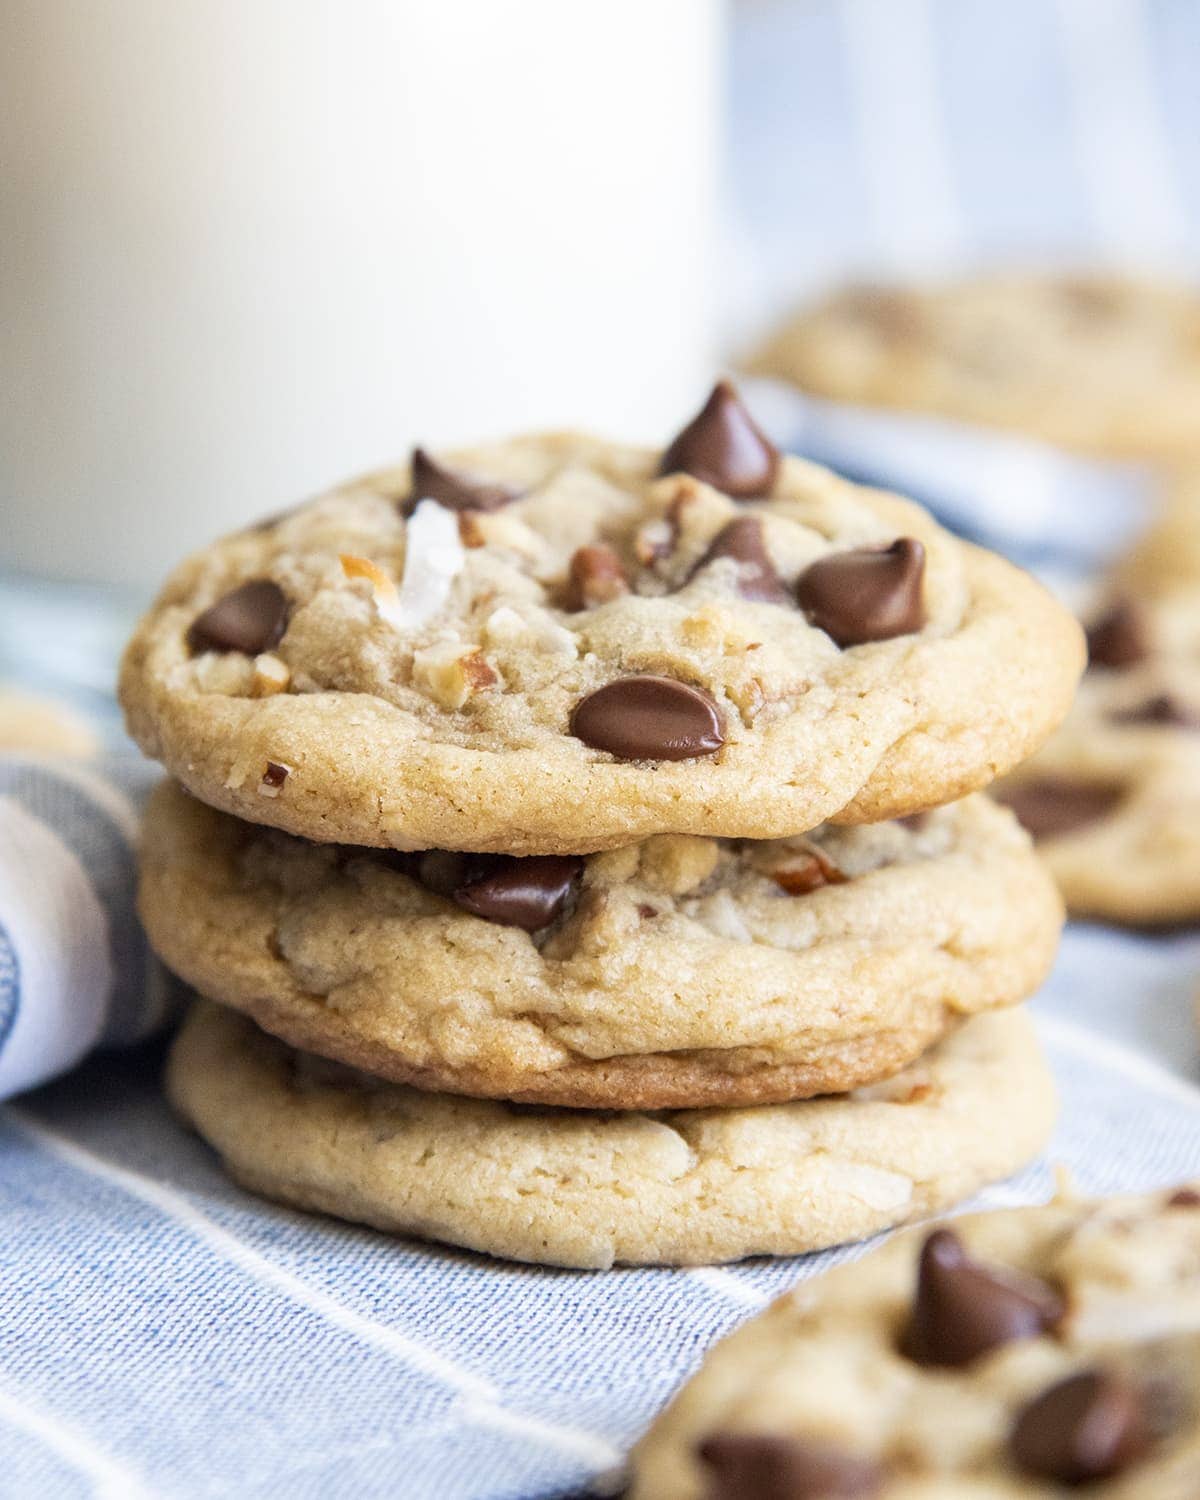 A stack of 3 drop style cookies with chocolate chips, pecans, and shredded coconut.